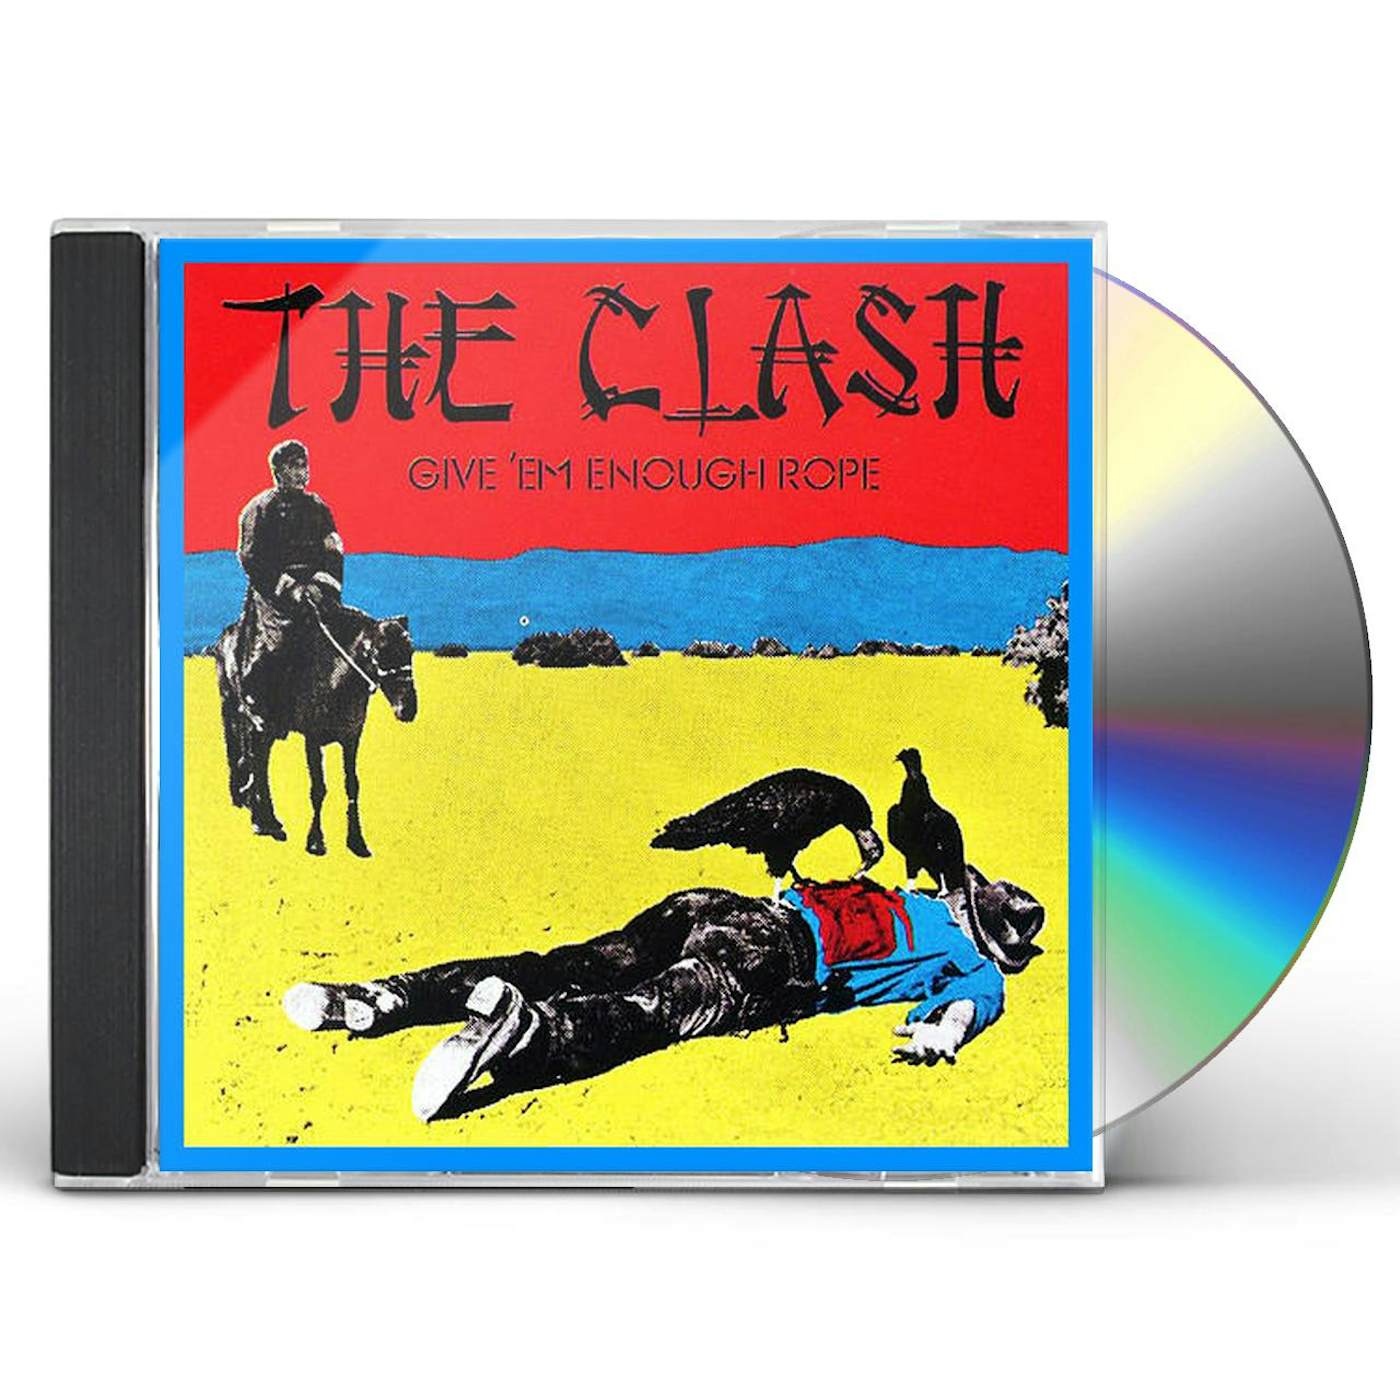 The Clash GIVE EM ENOUGH ROPE CD